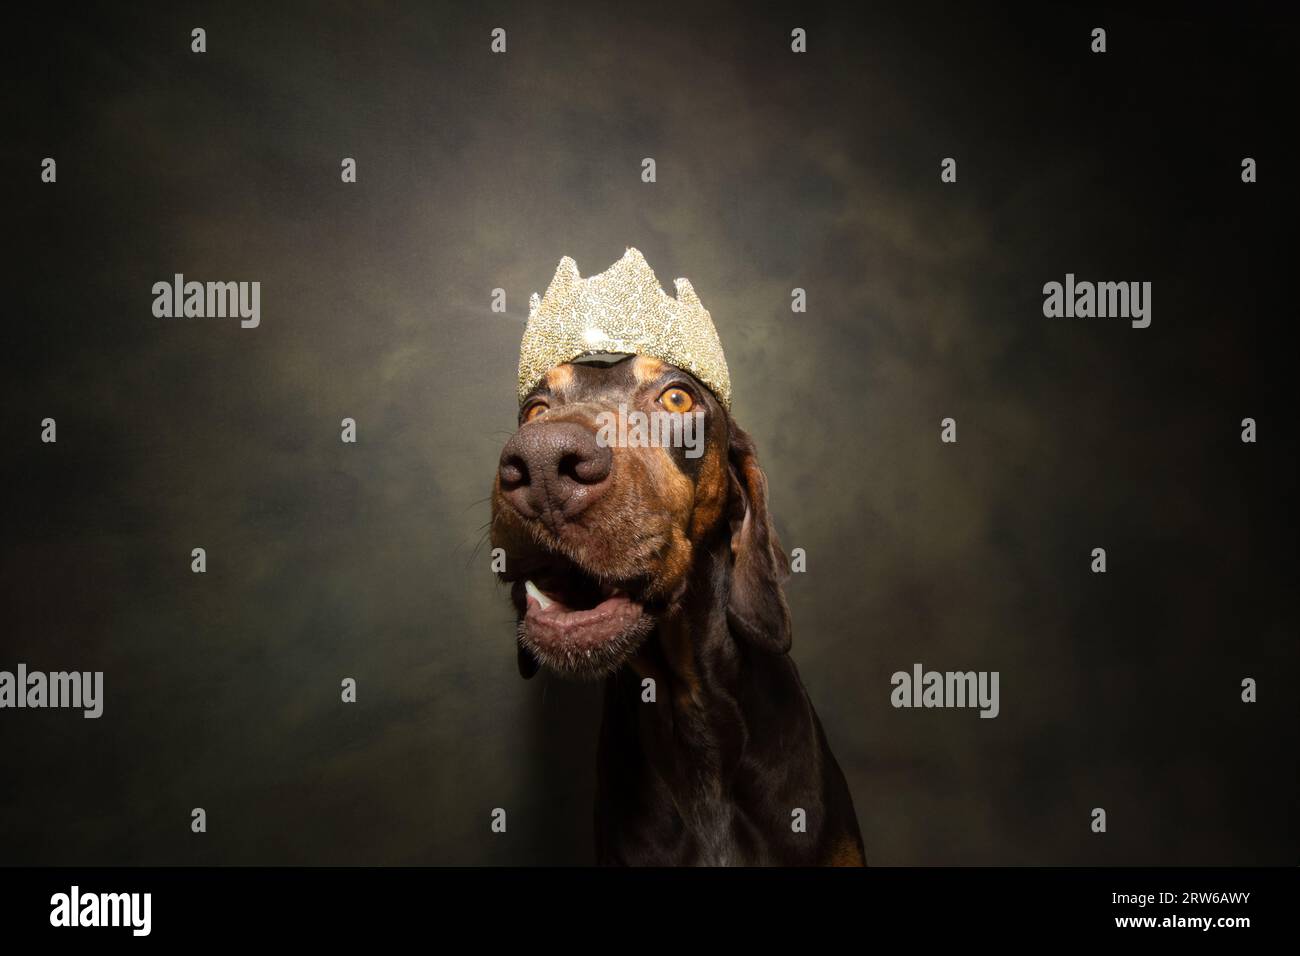 Portrait puppy dog wearing a crown. Isolated on green background. The king of the house and three wise men concept Stock Photo